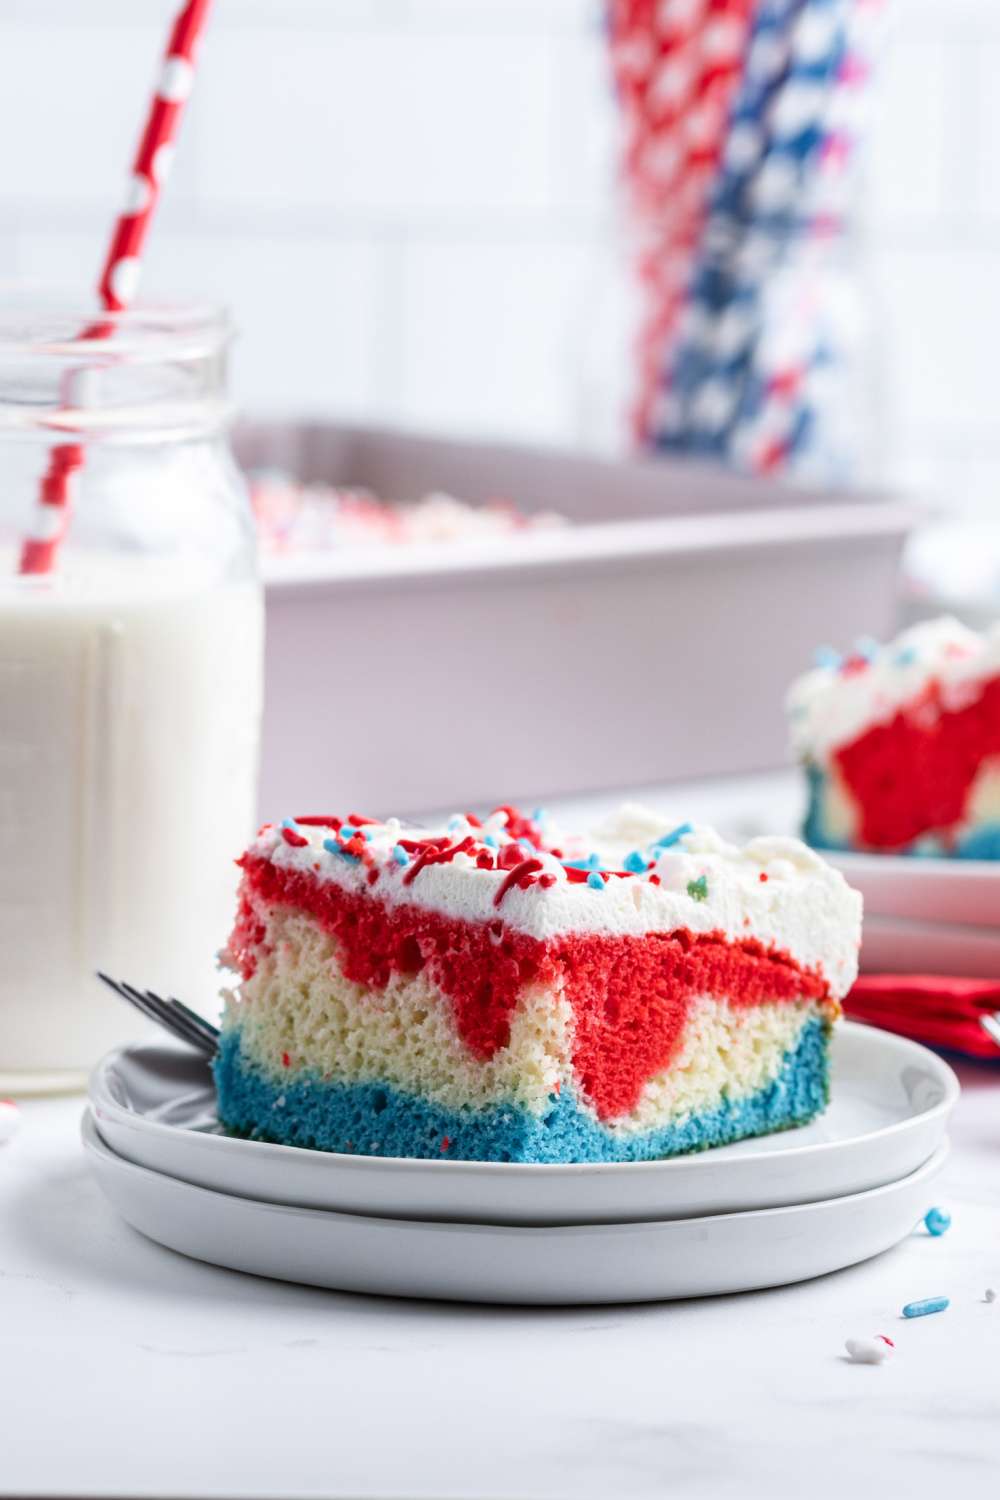 At first look, this cake looks plain, but when you slice in, this Red White and Blue Layered Cake reveals three vivid colors of the flag! via @familyfresh